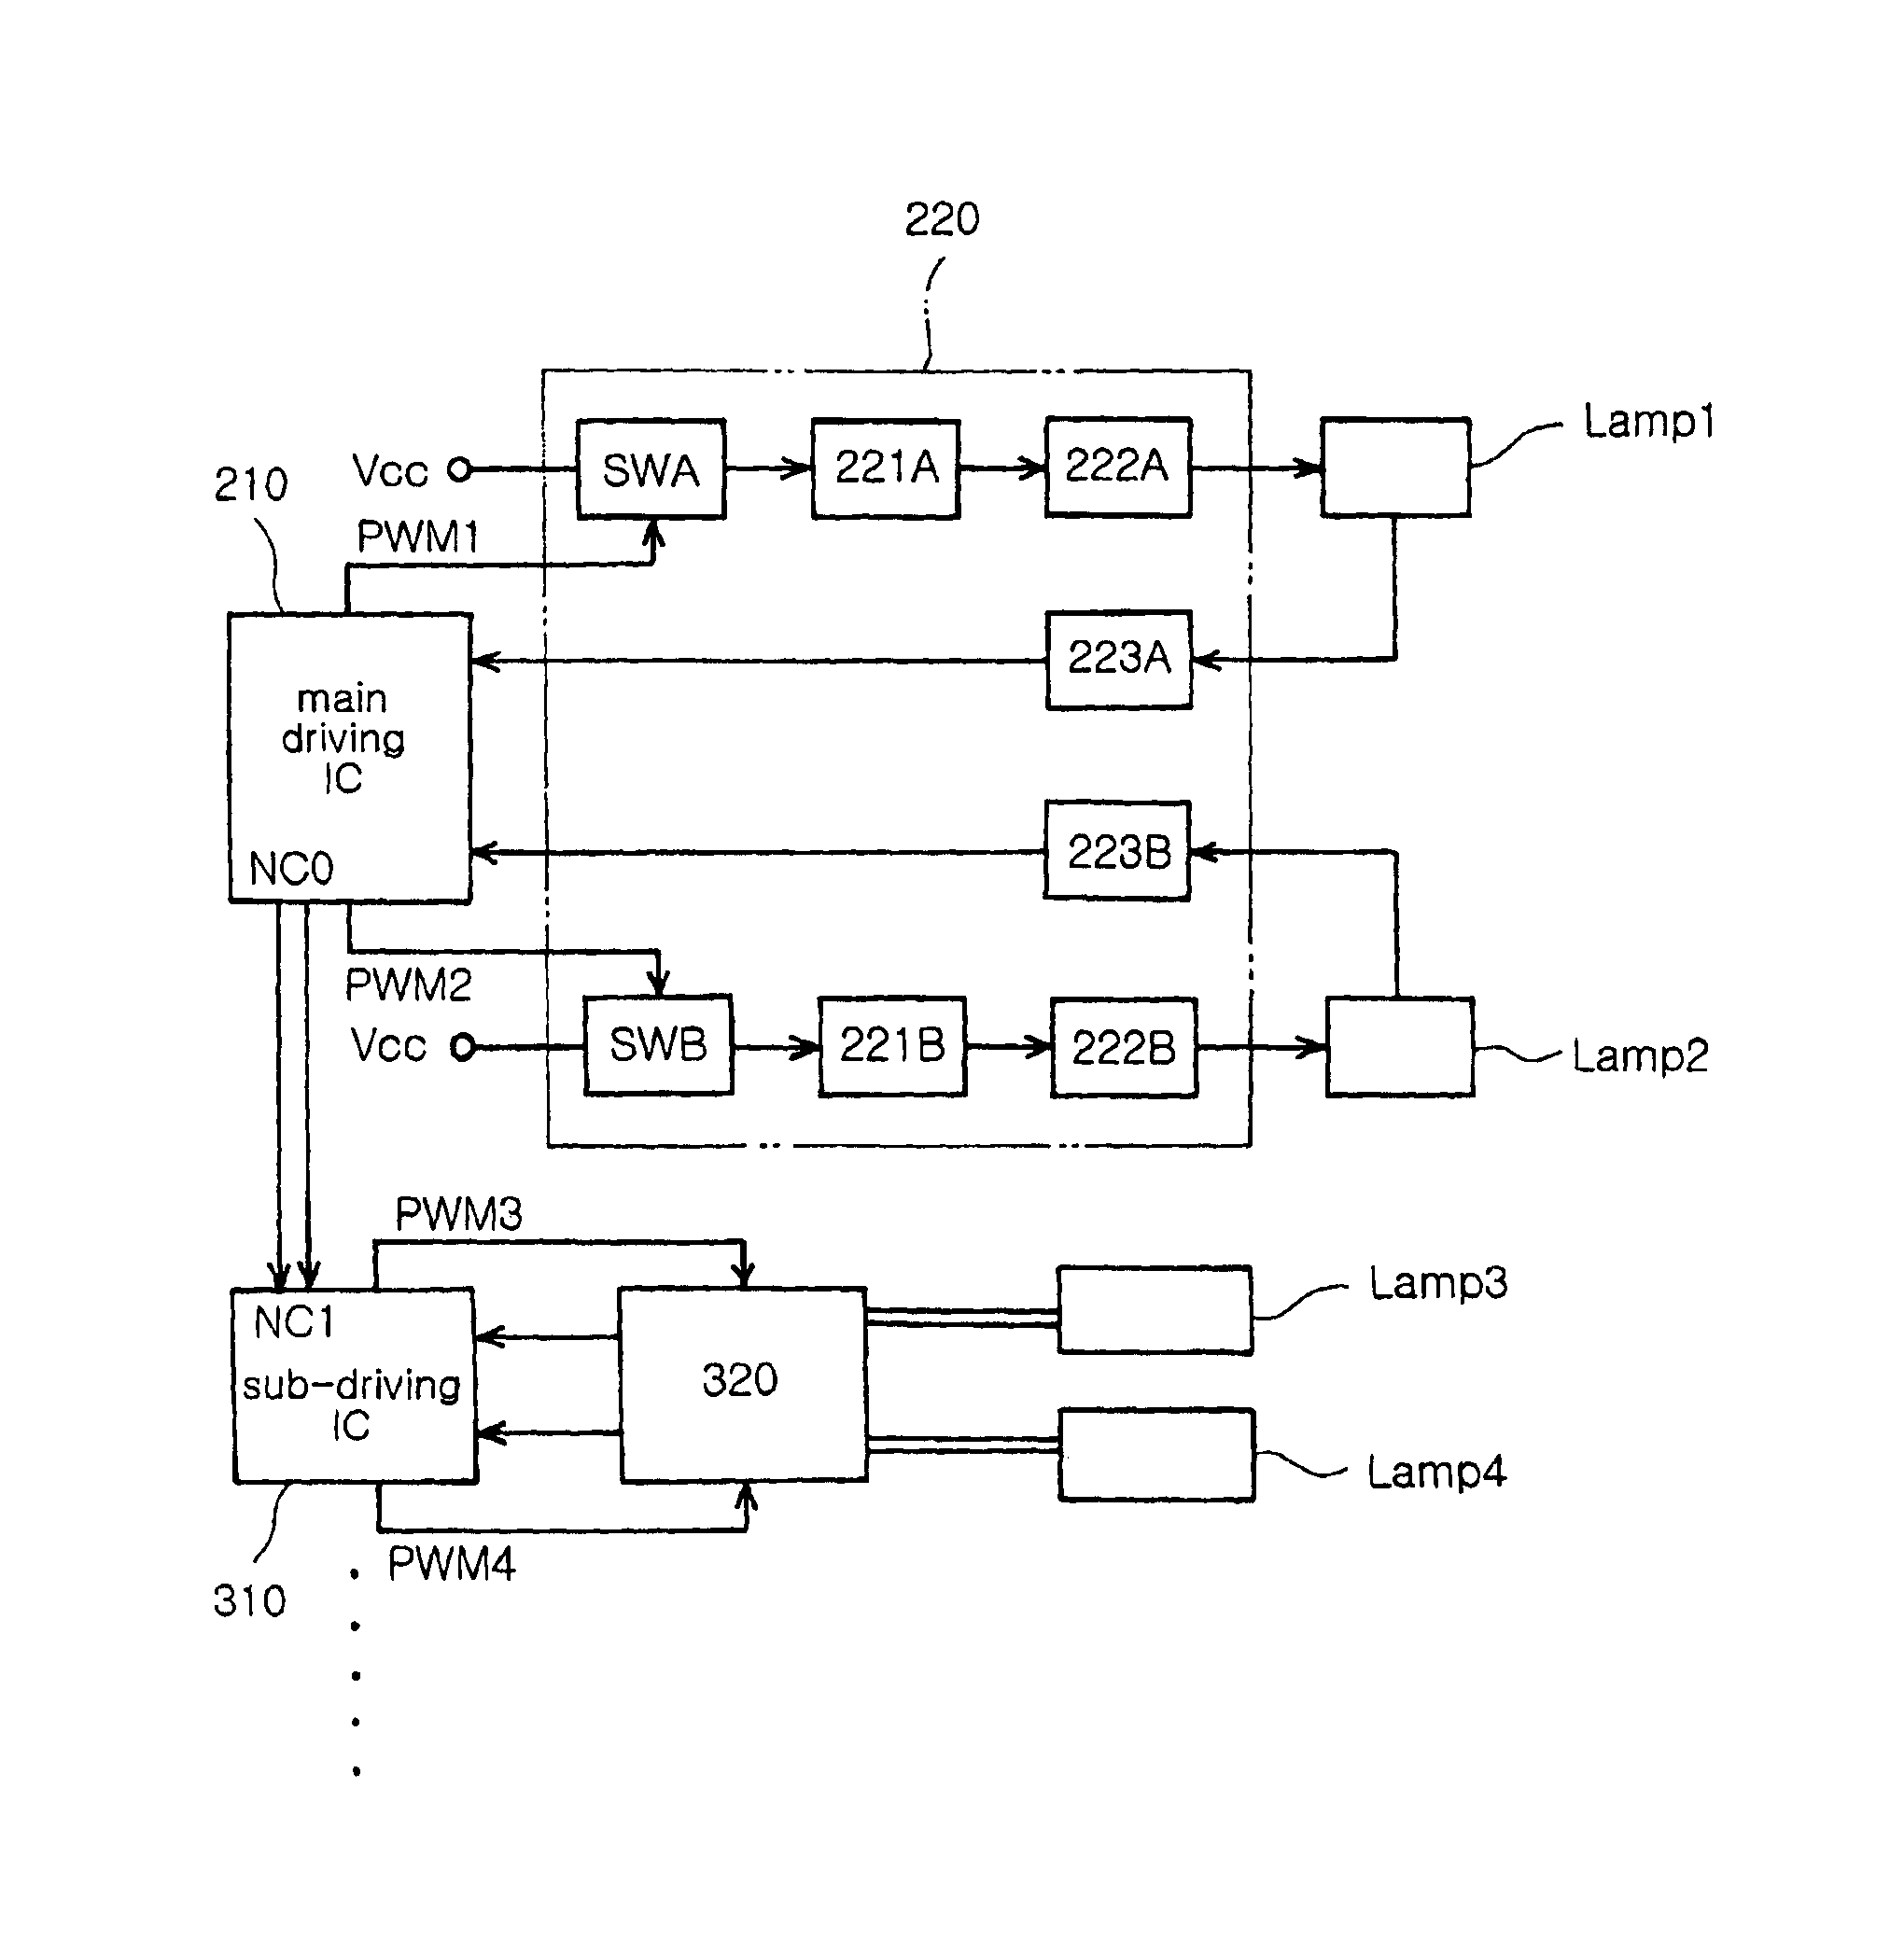 Backlight inverter for liquid crystal display panel of asynchronous pulse width modulation driving type